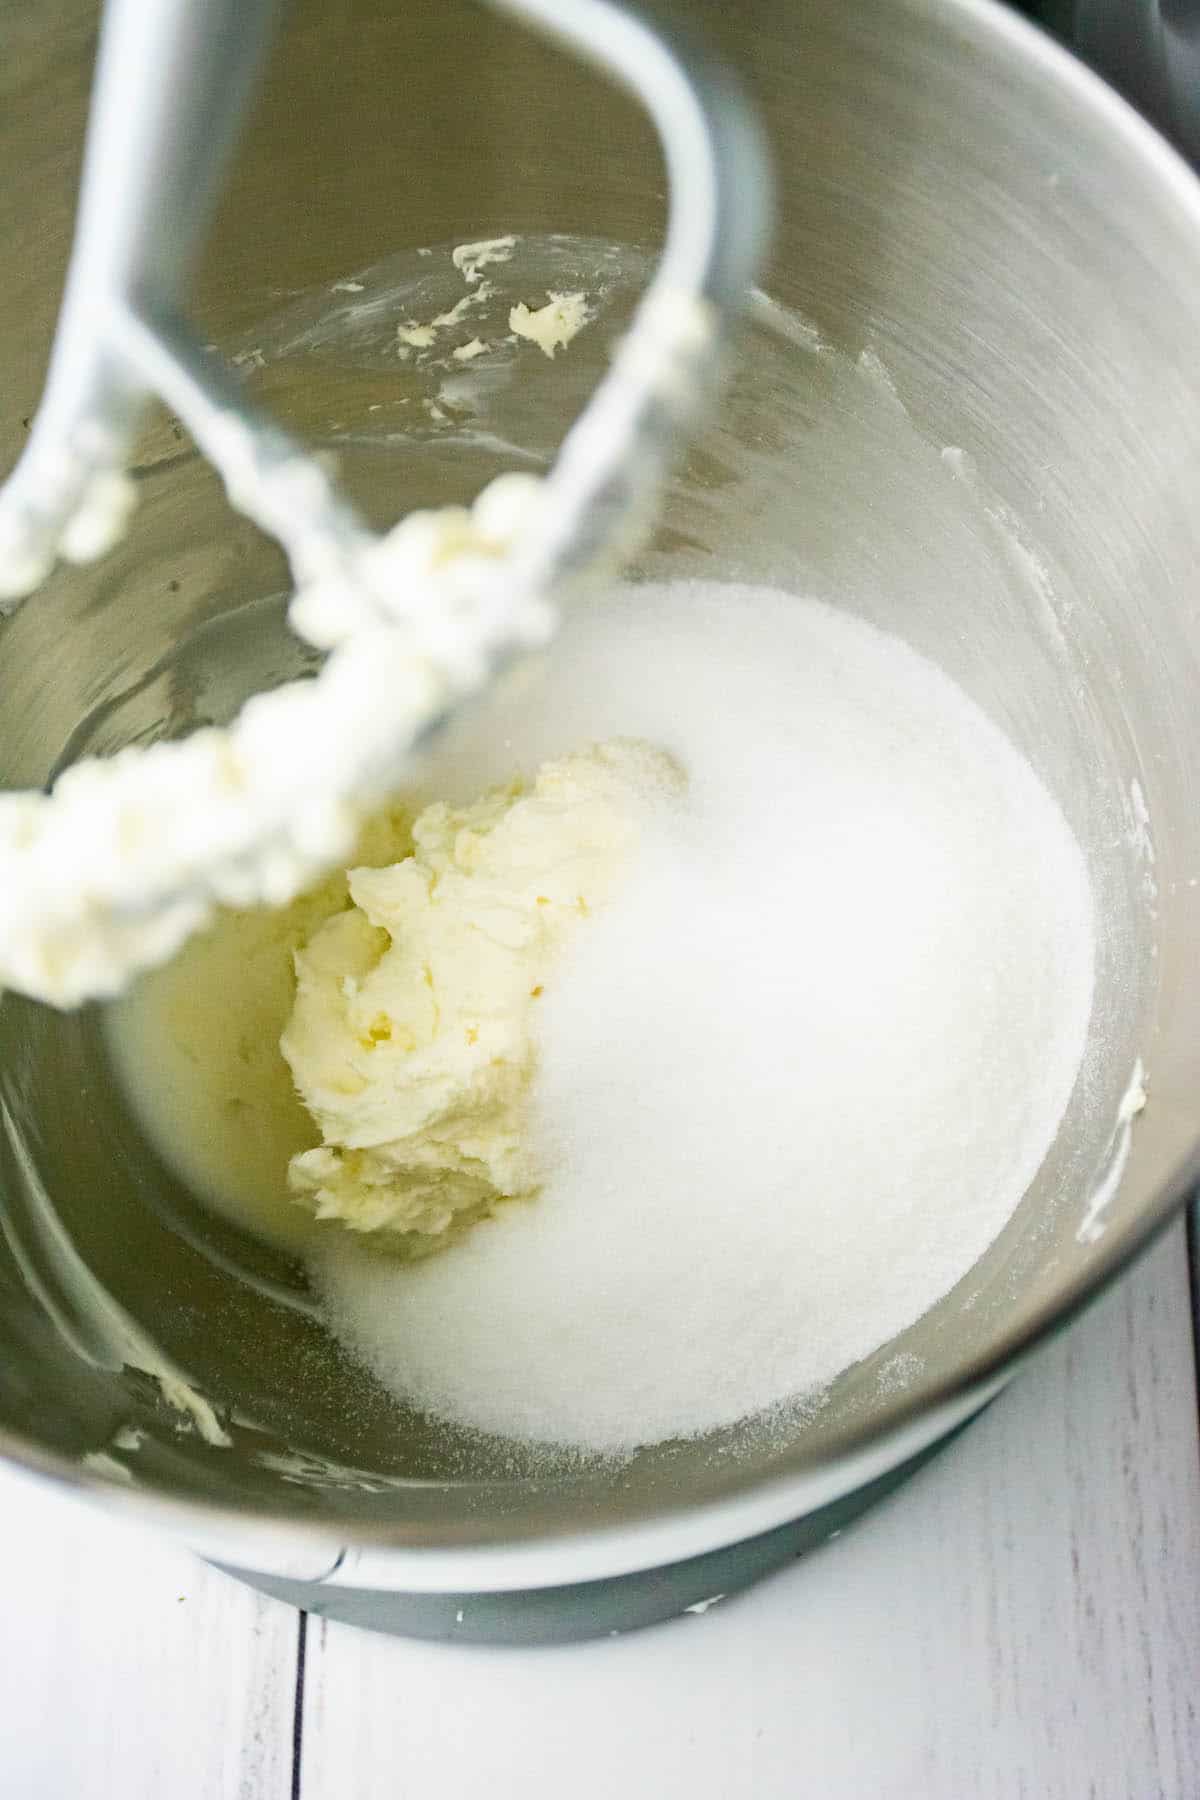 Cream cheese, butter, and sugar in a stand mixer to make strawberry cheesecake cookies.